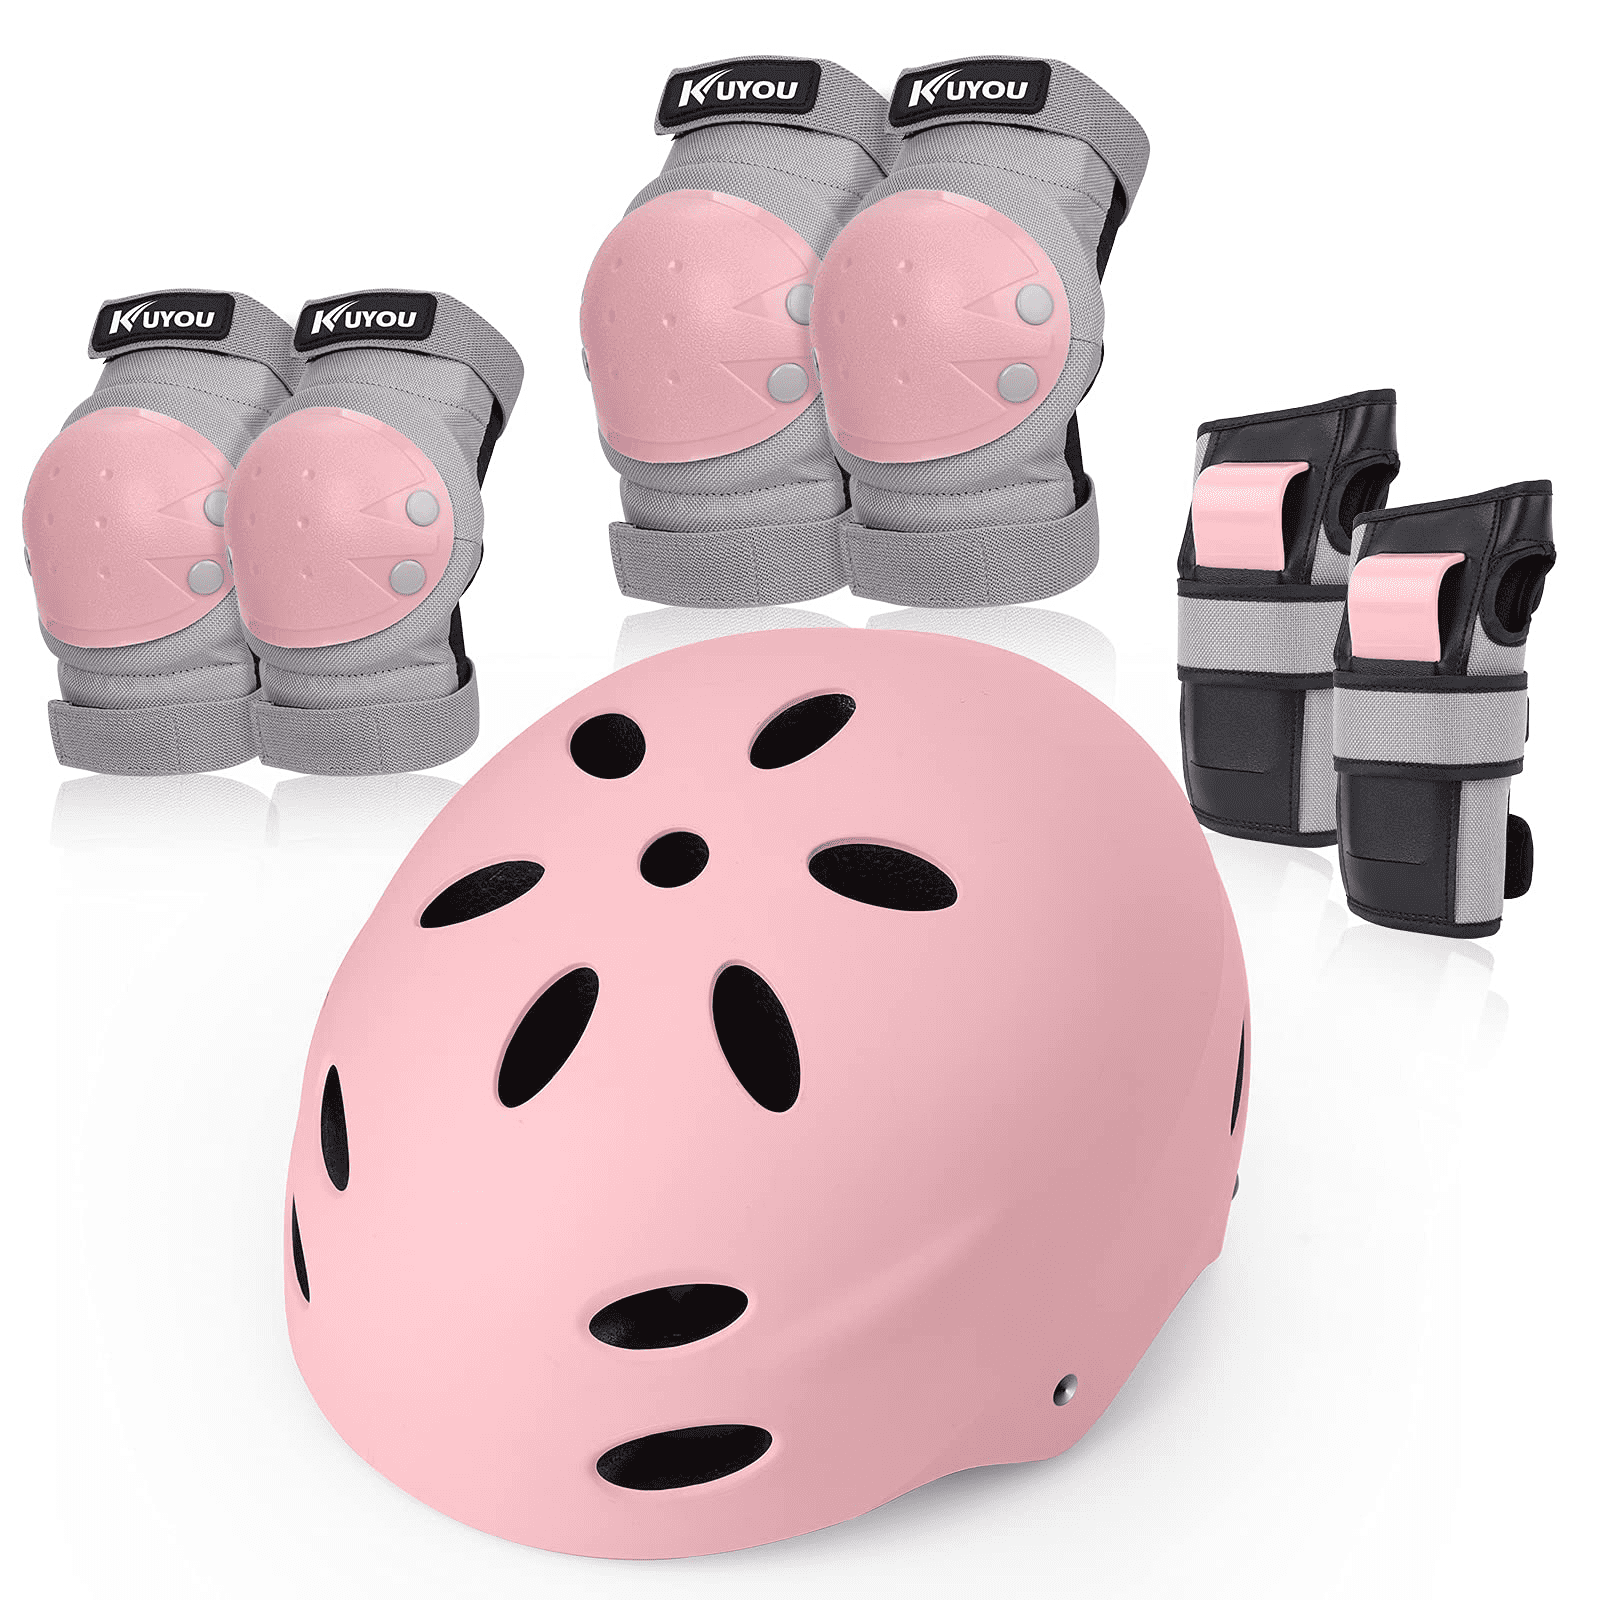 Kuyou Kids Protective Gear Set,6pcs Knee and Elbow Pads with Wrist Guards 